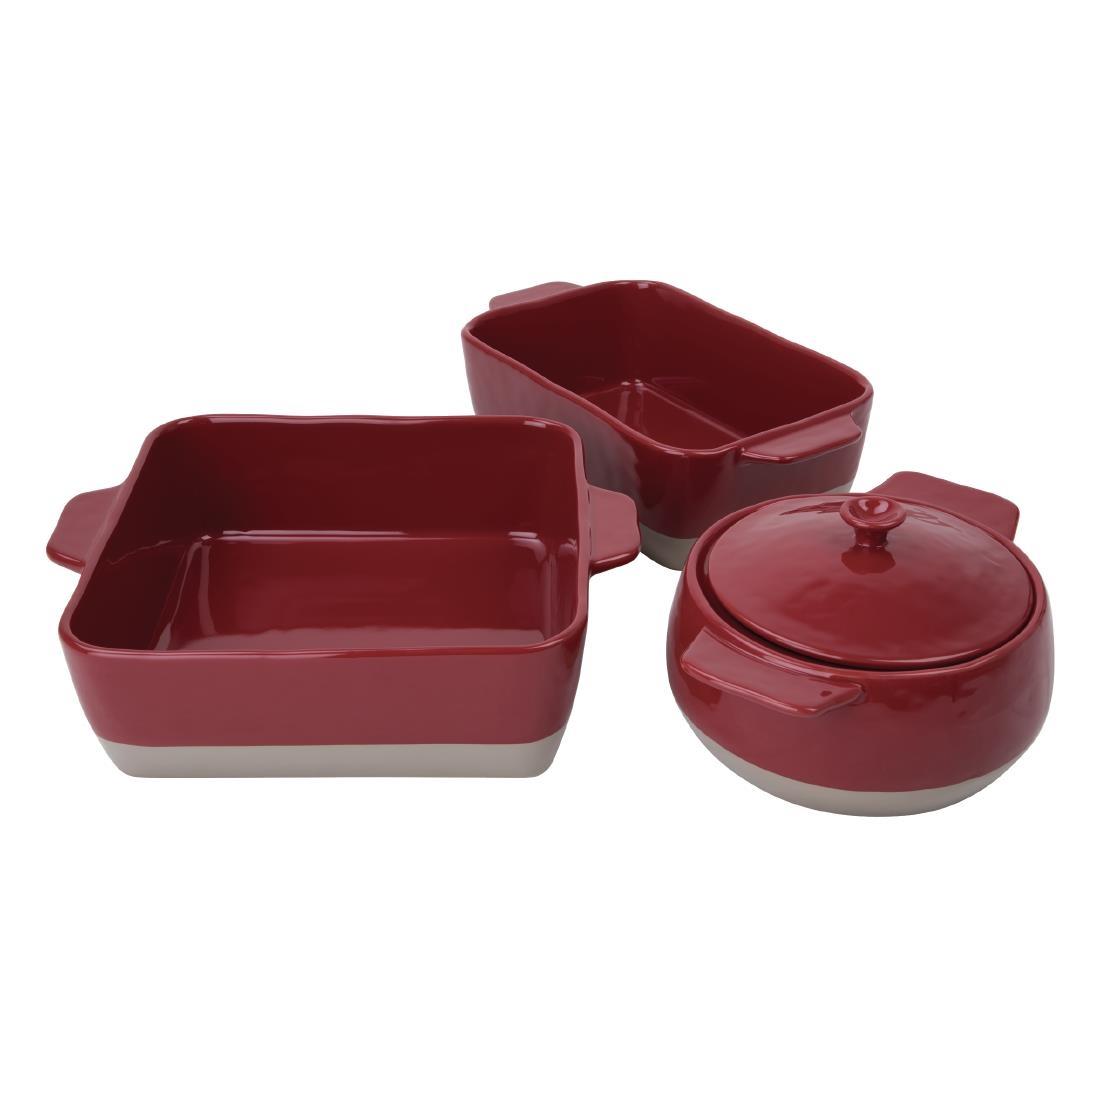 Olympia Red And Taupe Ceramic Roasting Dish - DB522  - 2